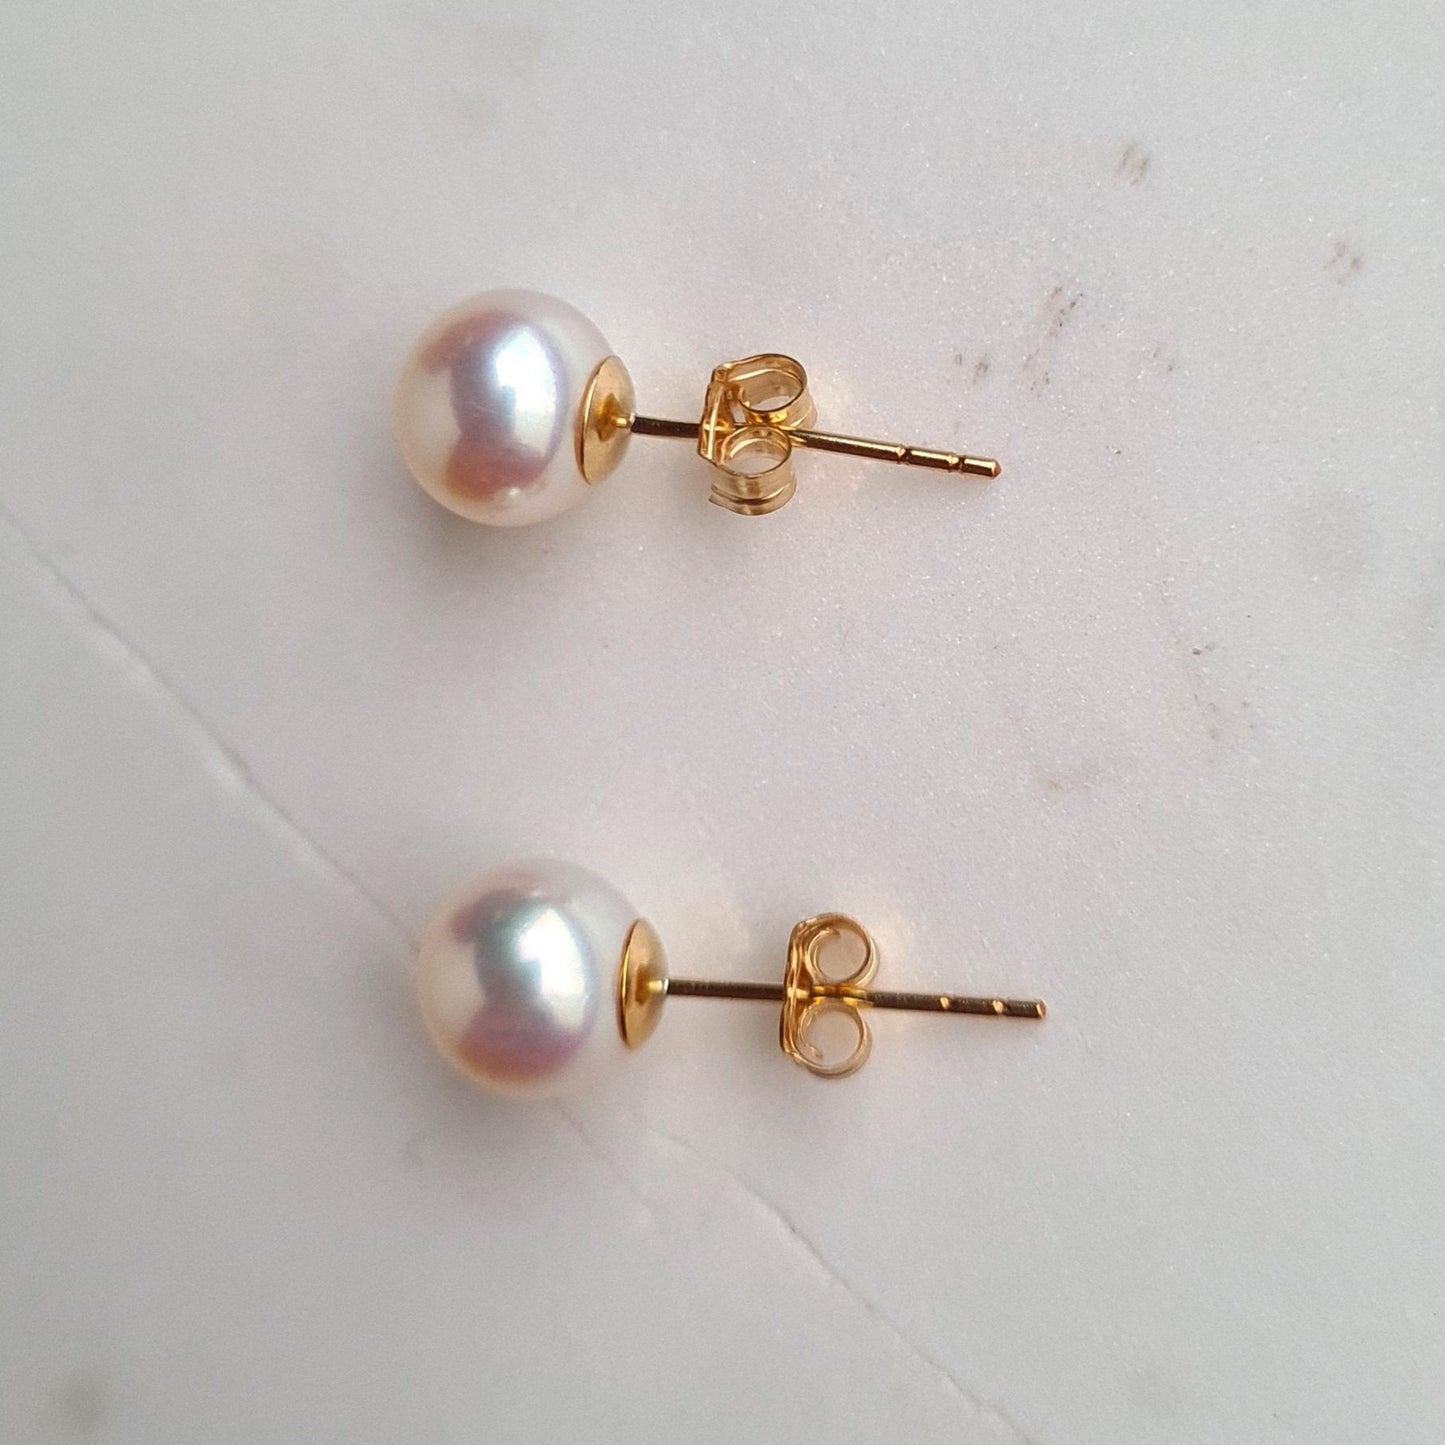 AAA quality 7.5 to 8 mm Almost Round Fresh Water Pearl with Gold filled Ear Stud - White